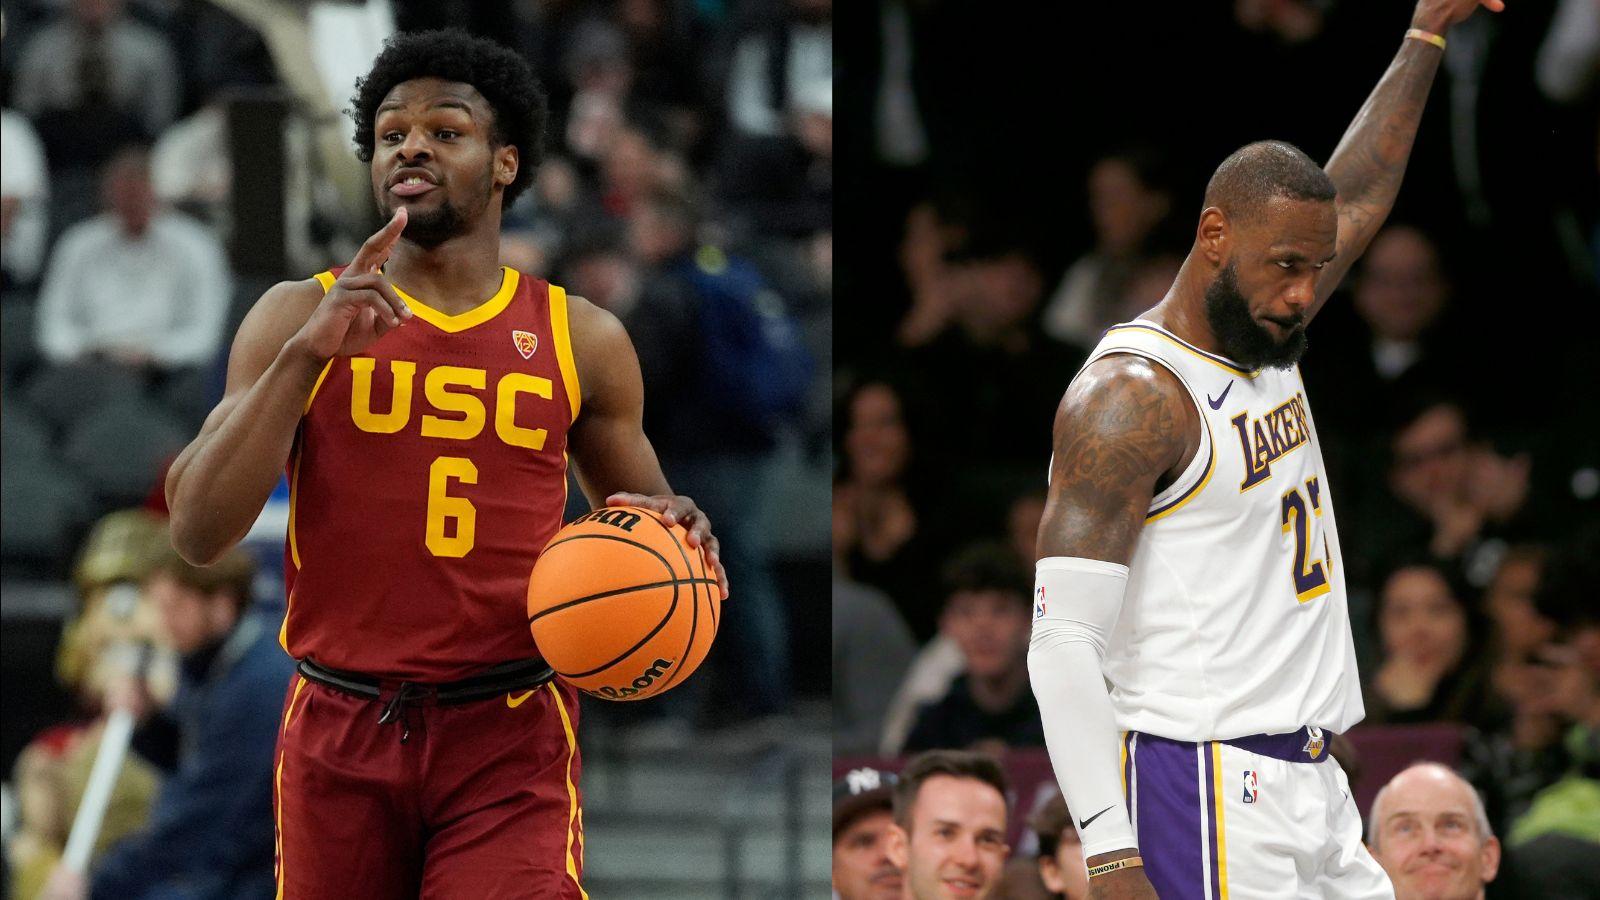 Bronny James as a member of the USC Trojans (left) and LeBron James as a member of the Los Angeles Lakers (right).